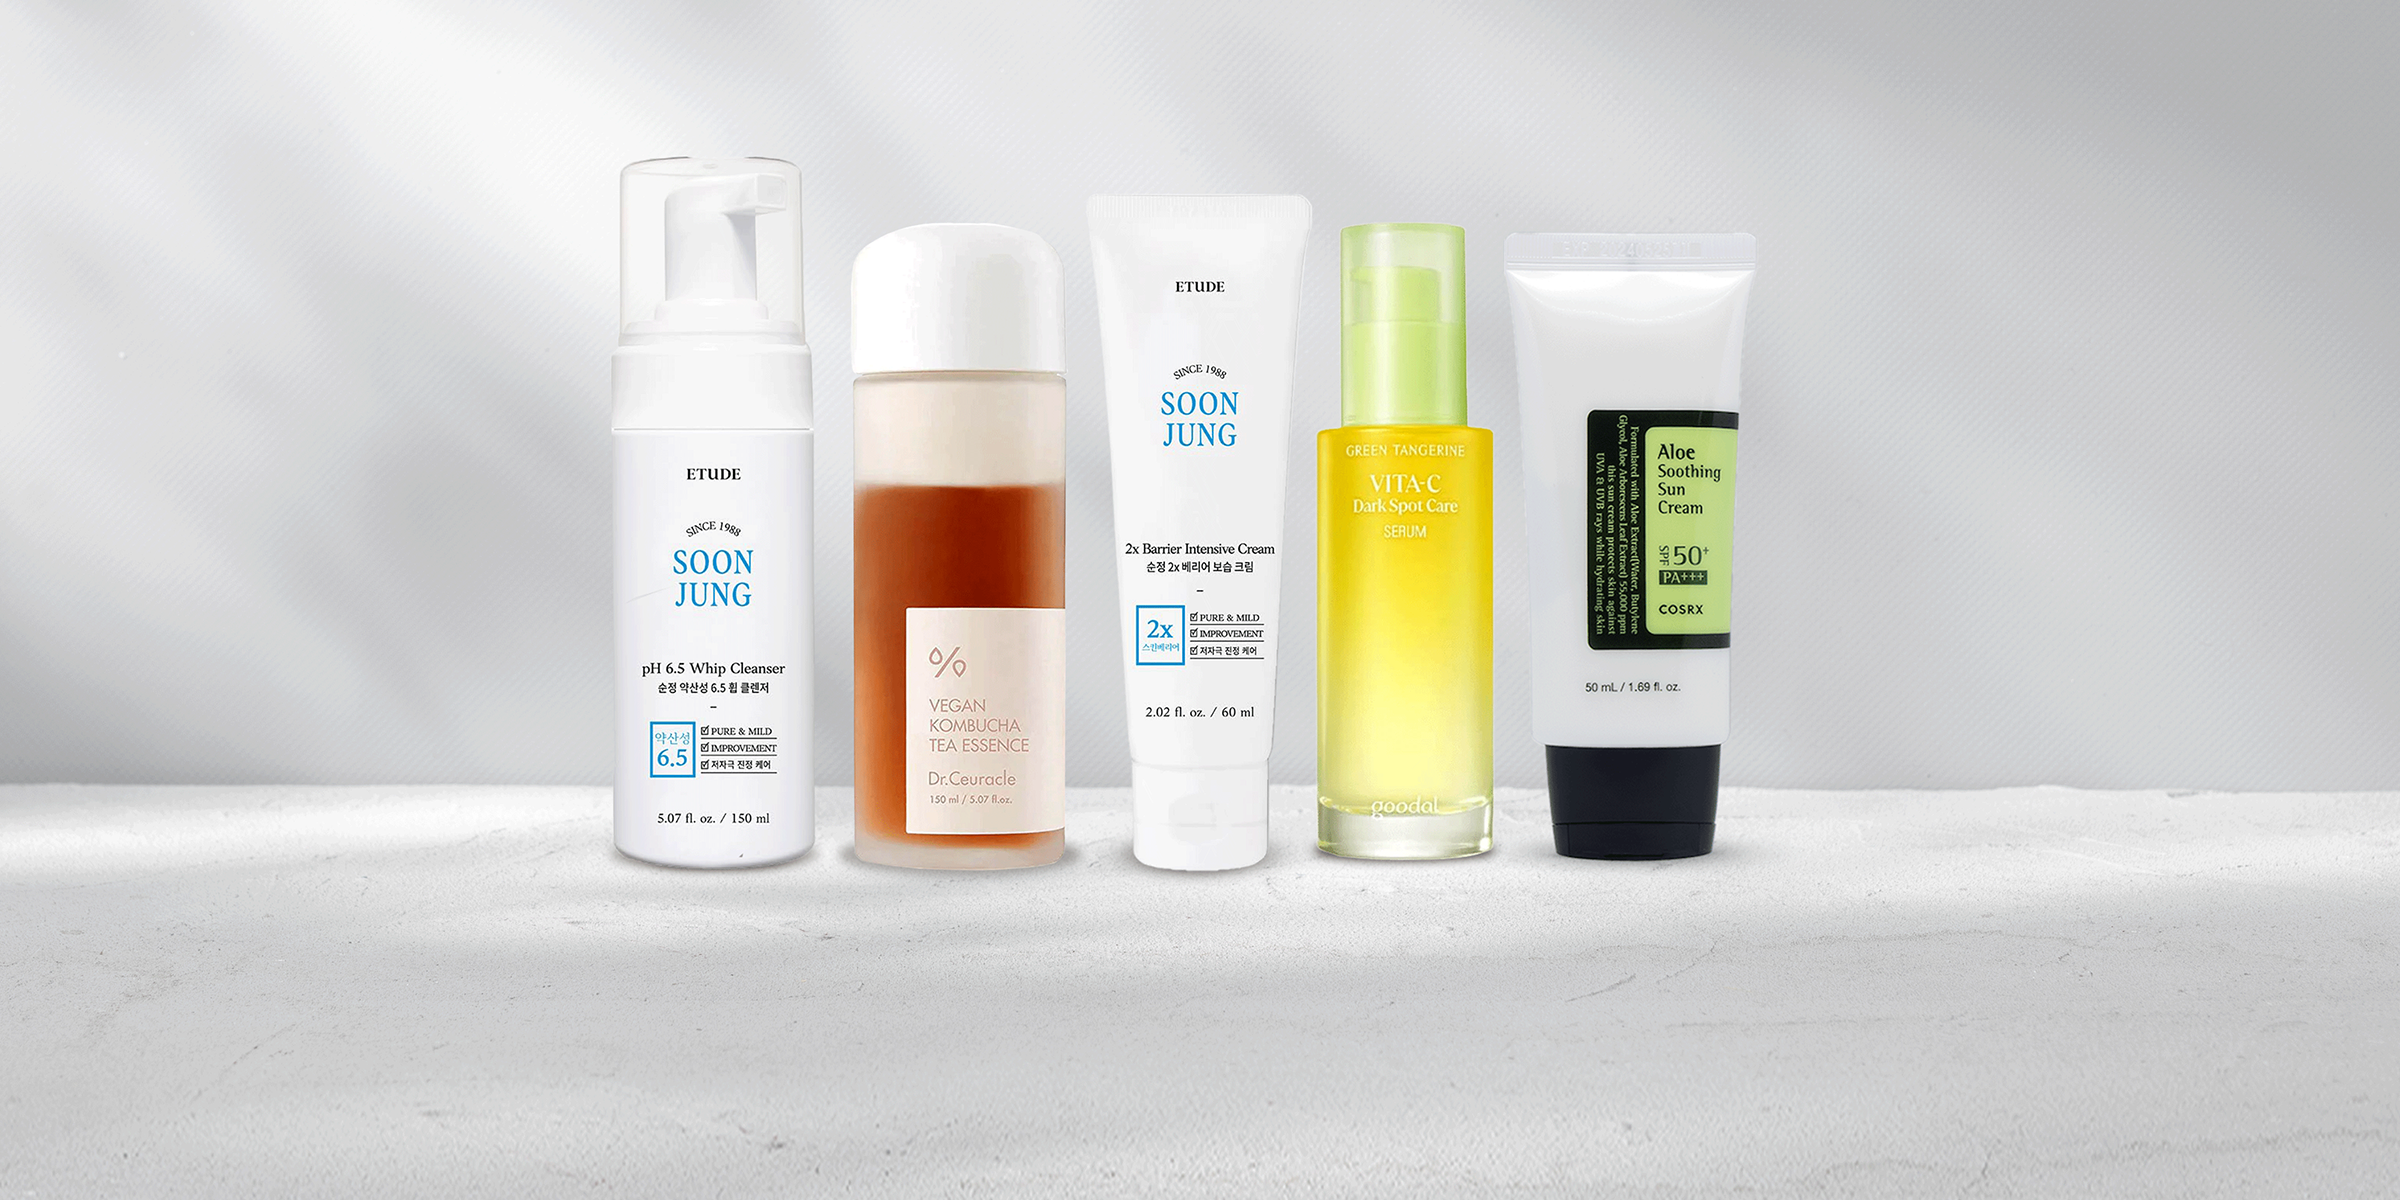 Skincare products including cleanser, toner, serum, moisturizer, and suncare standing next to each other.